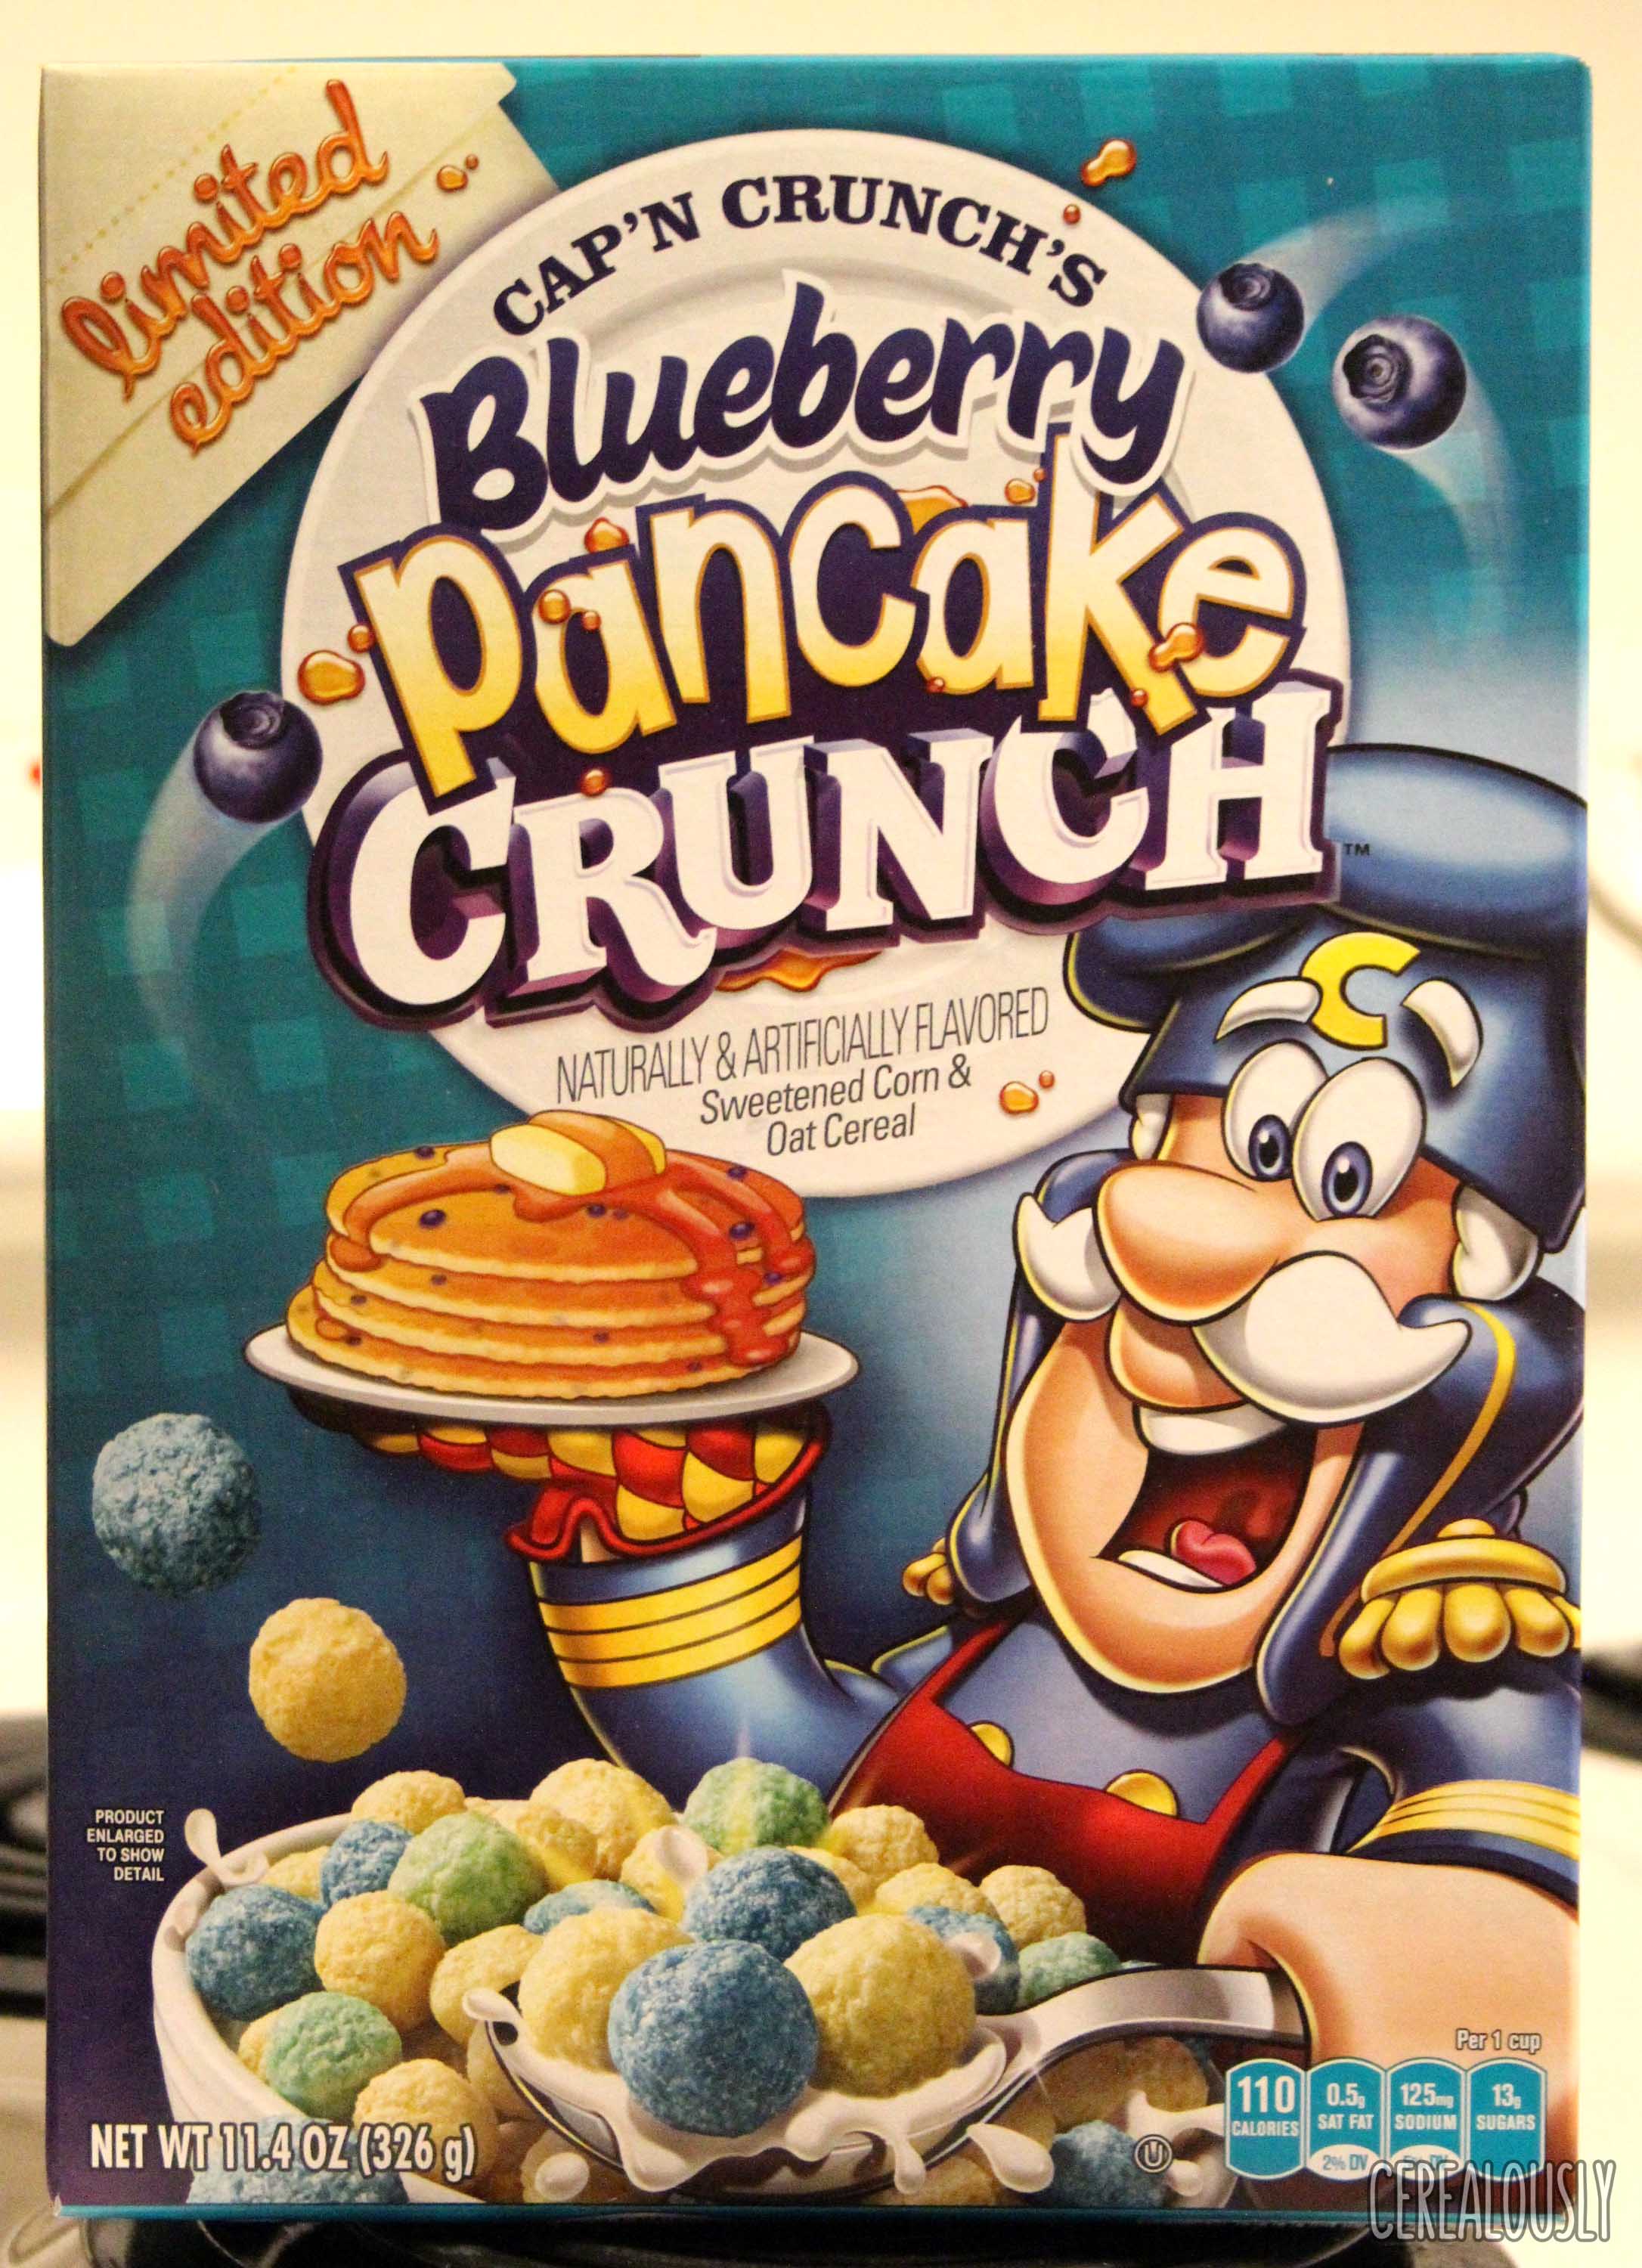 Review: Cap’n Crunch’s Blueberry Pancake Crunch Cereal.